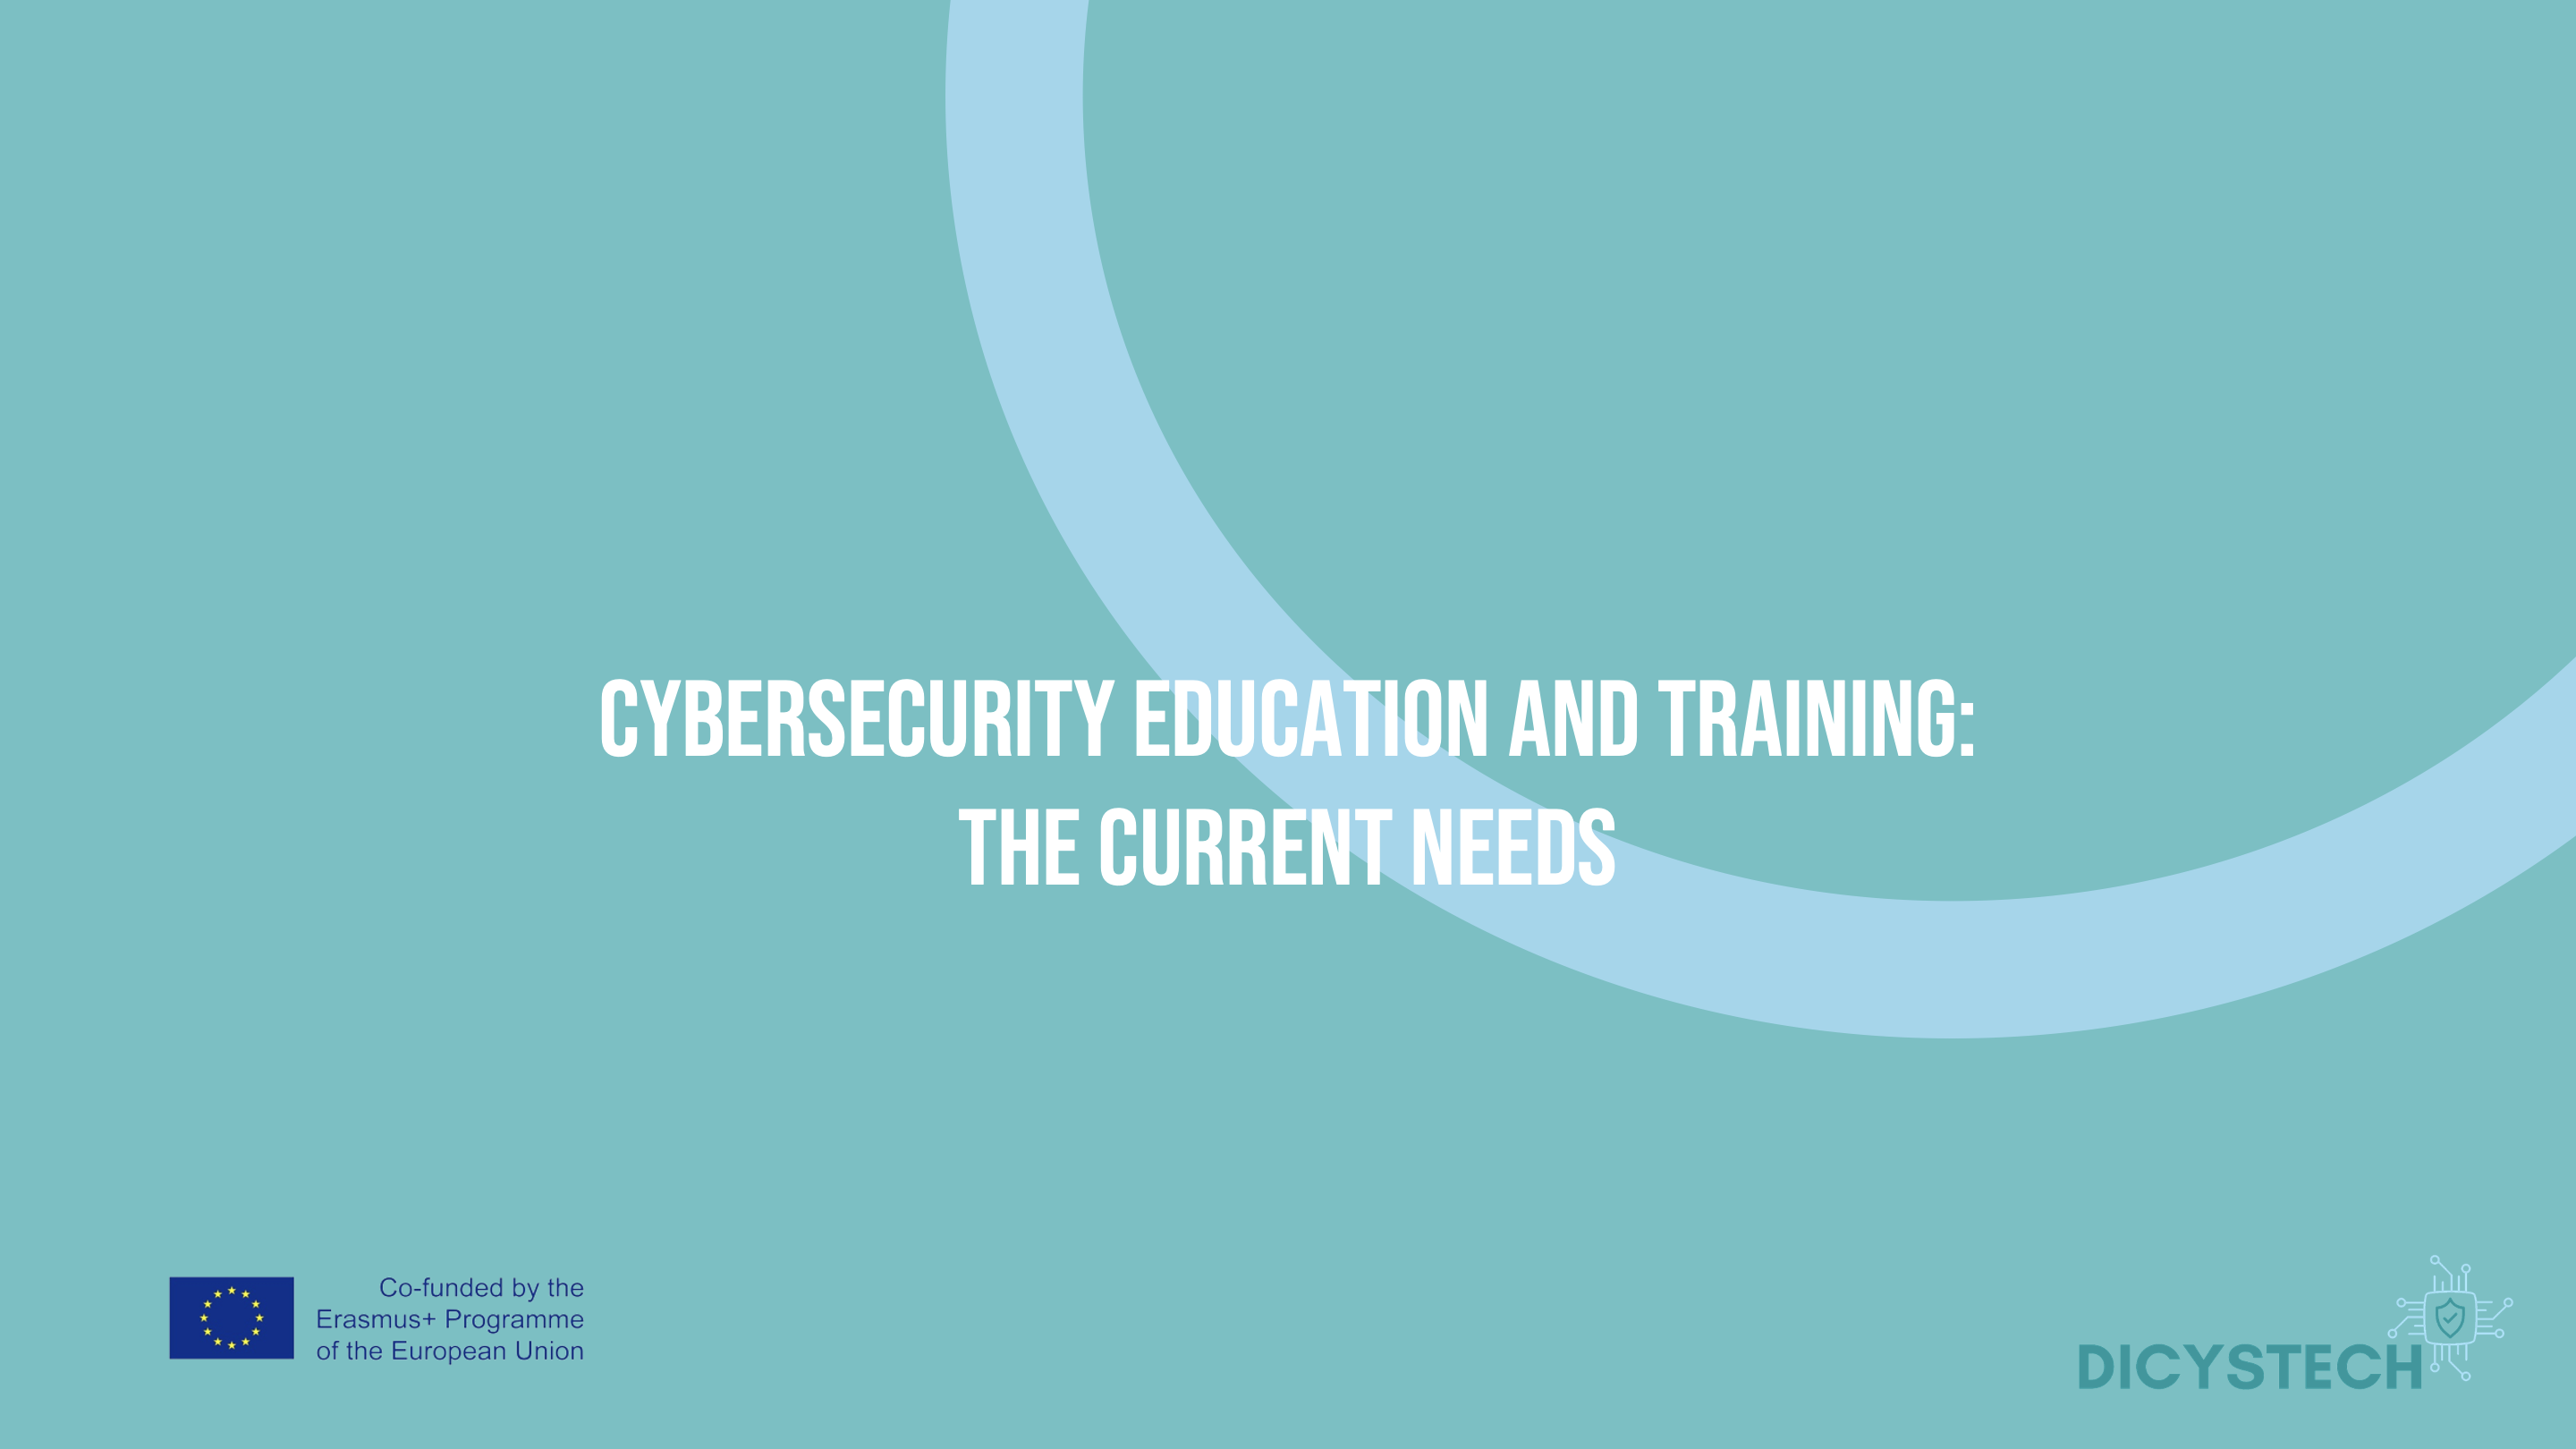 CYBERSECURITY EDUCATION AND TRAINING THE CURRENT NEEDS